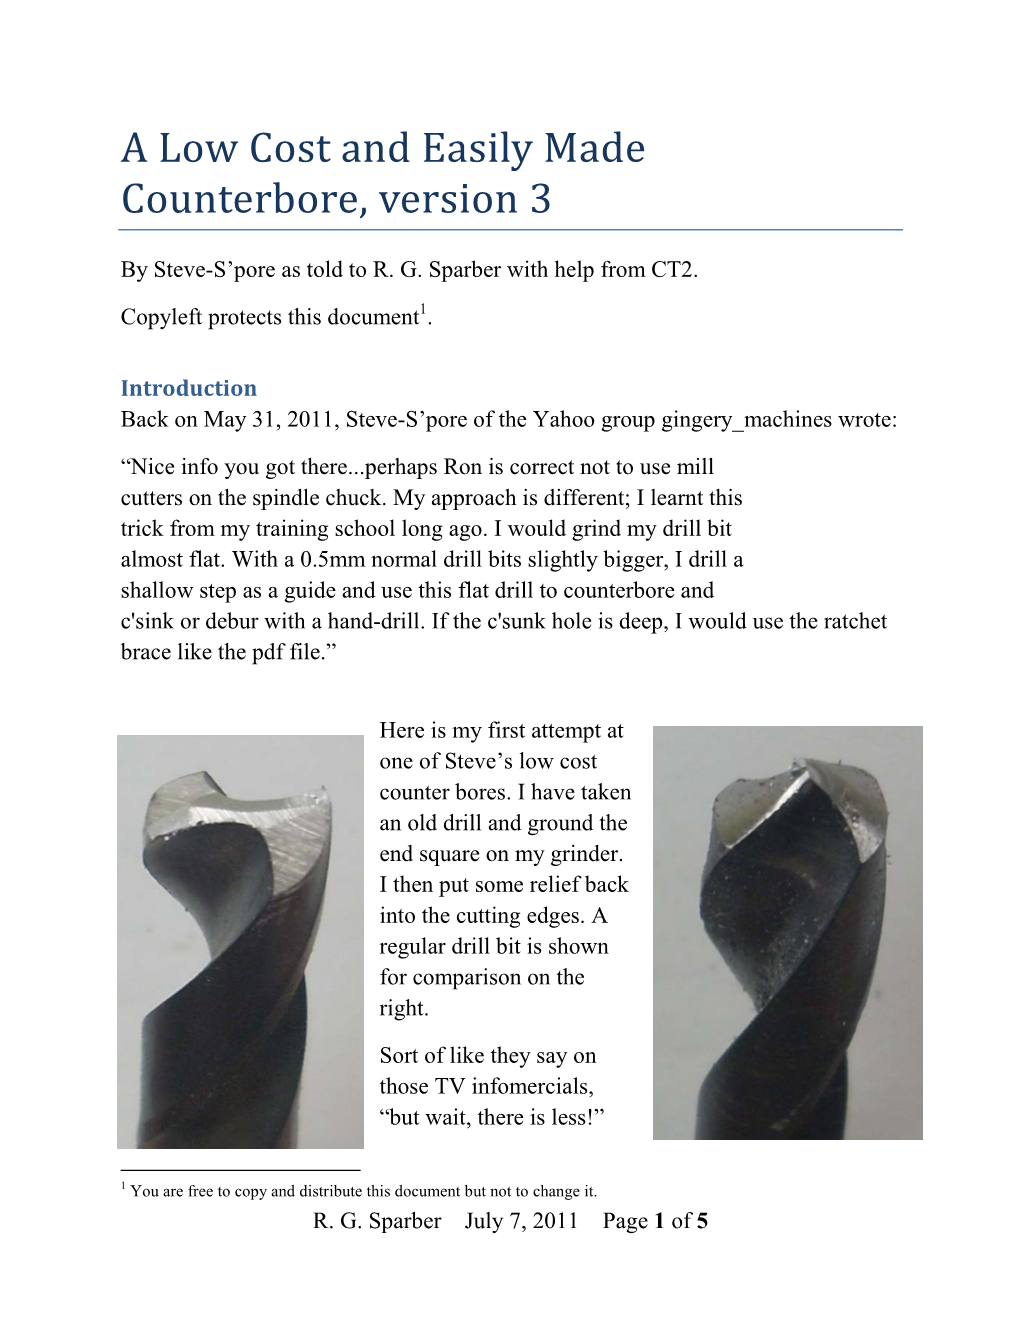 A Low Cost and Easily Made Counterbore, Version 3